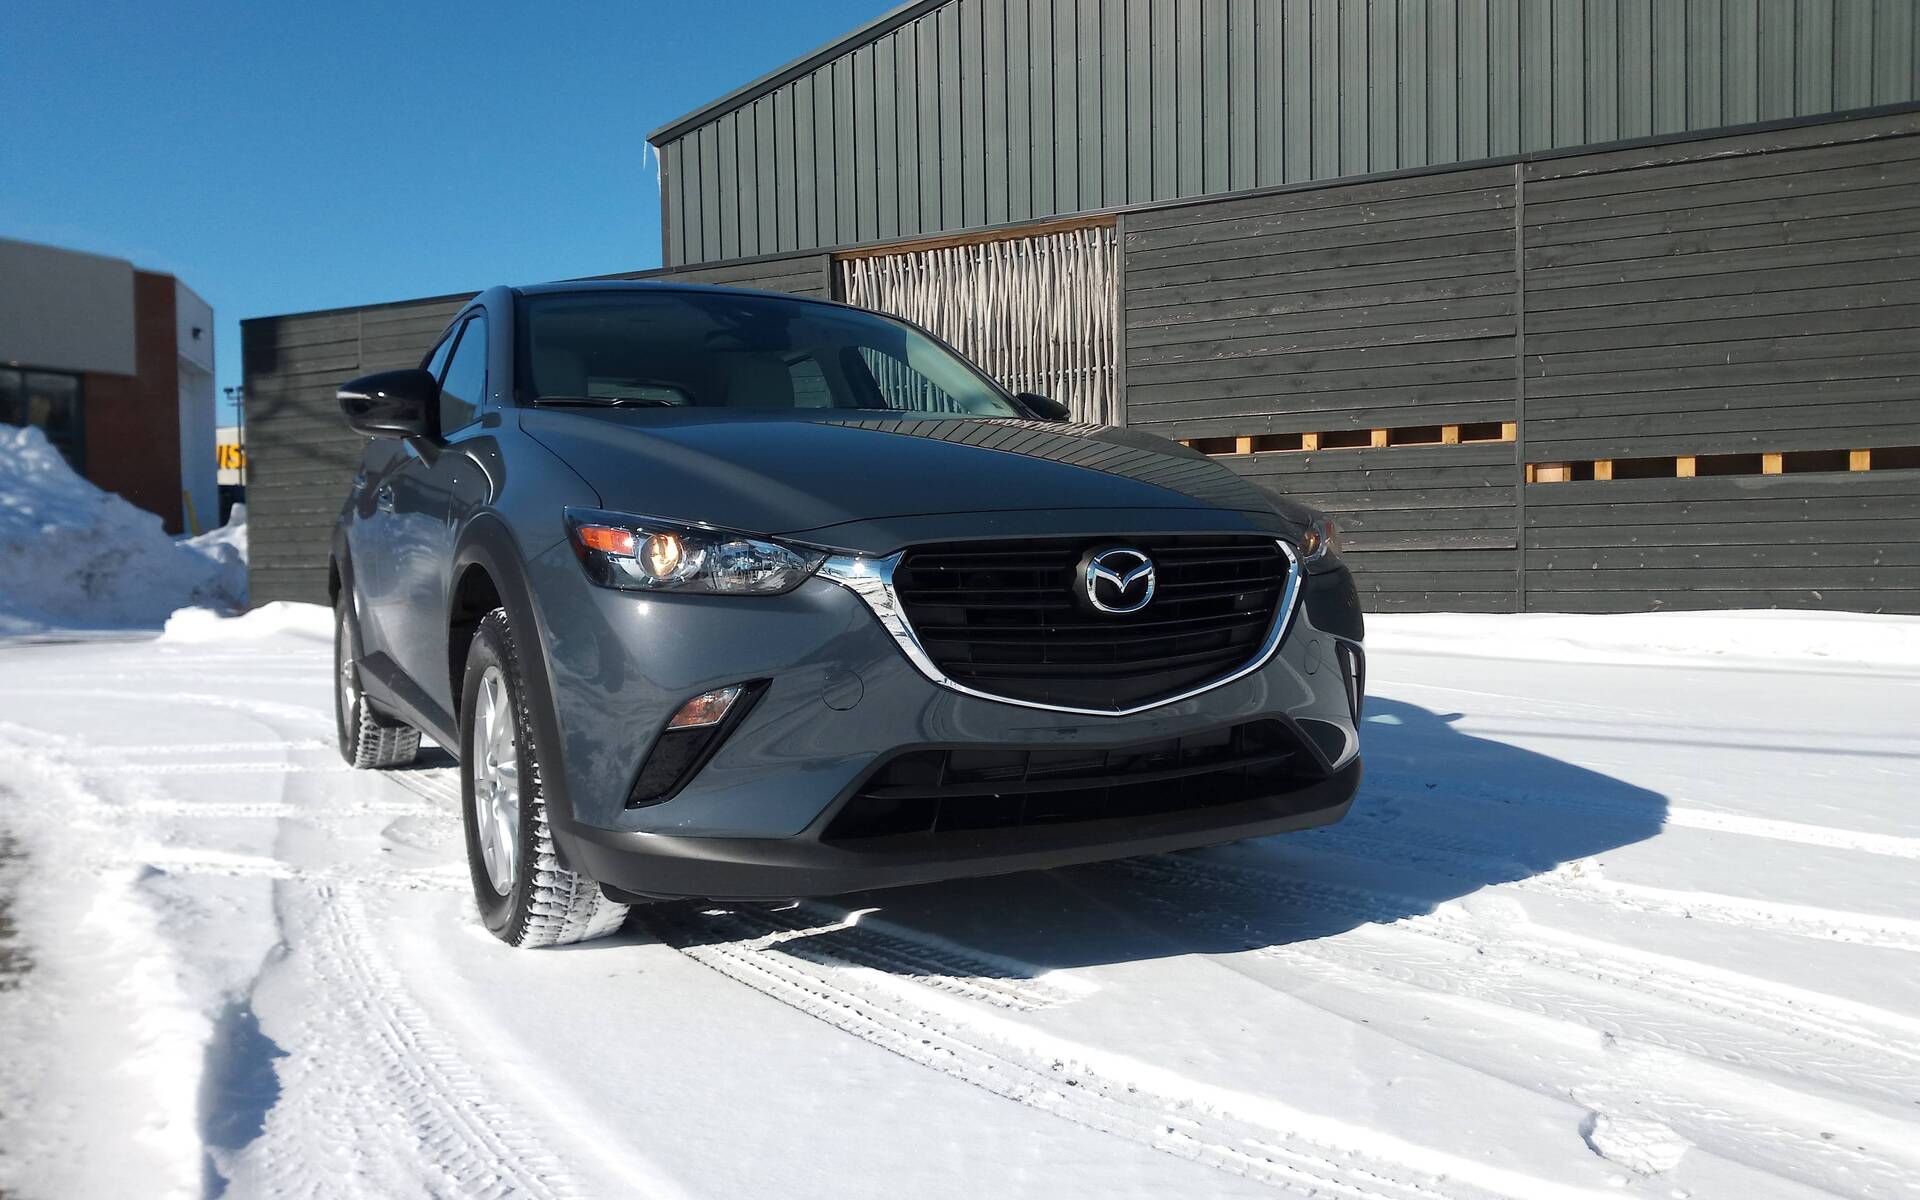 The Mazda CX-3 is One Cute Little Crossover